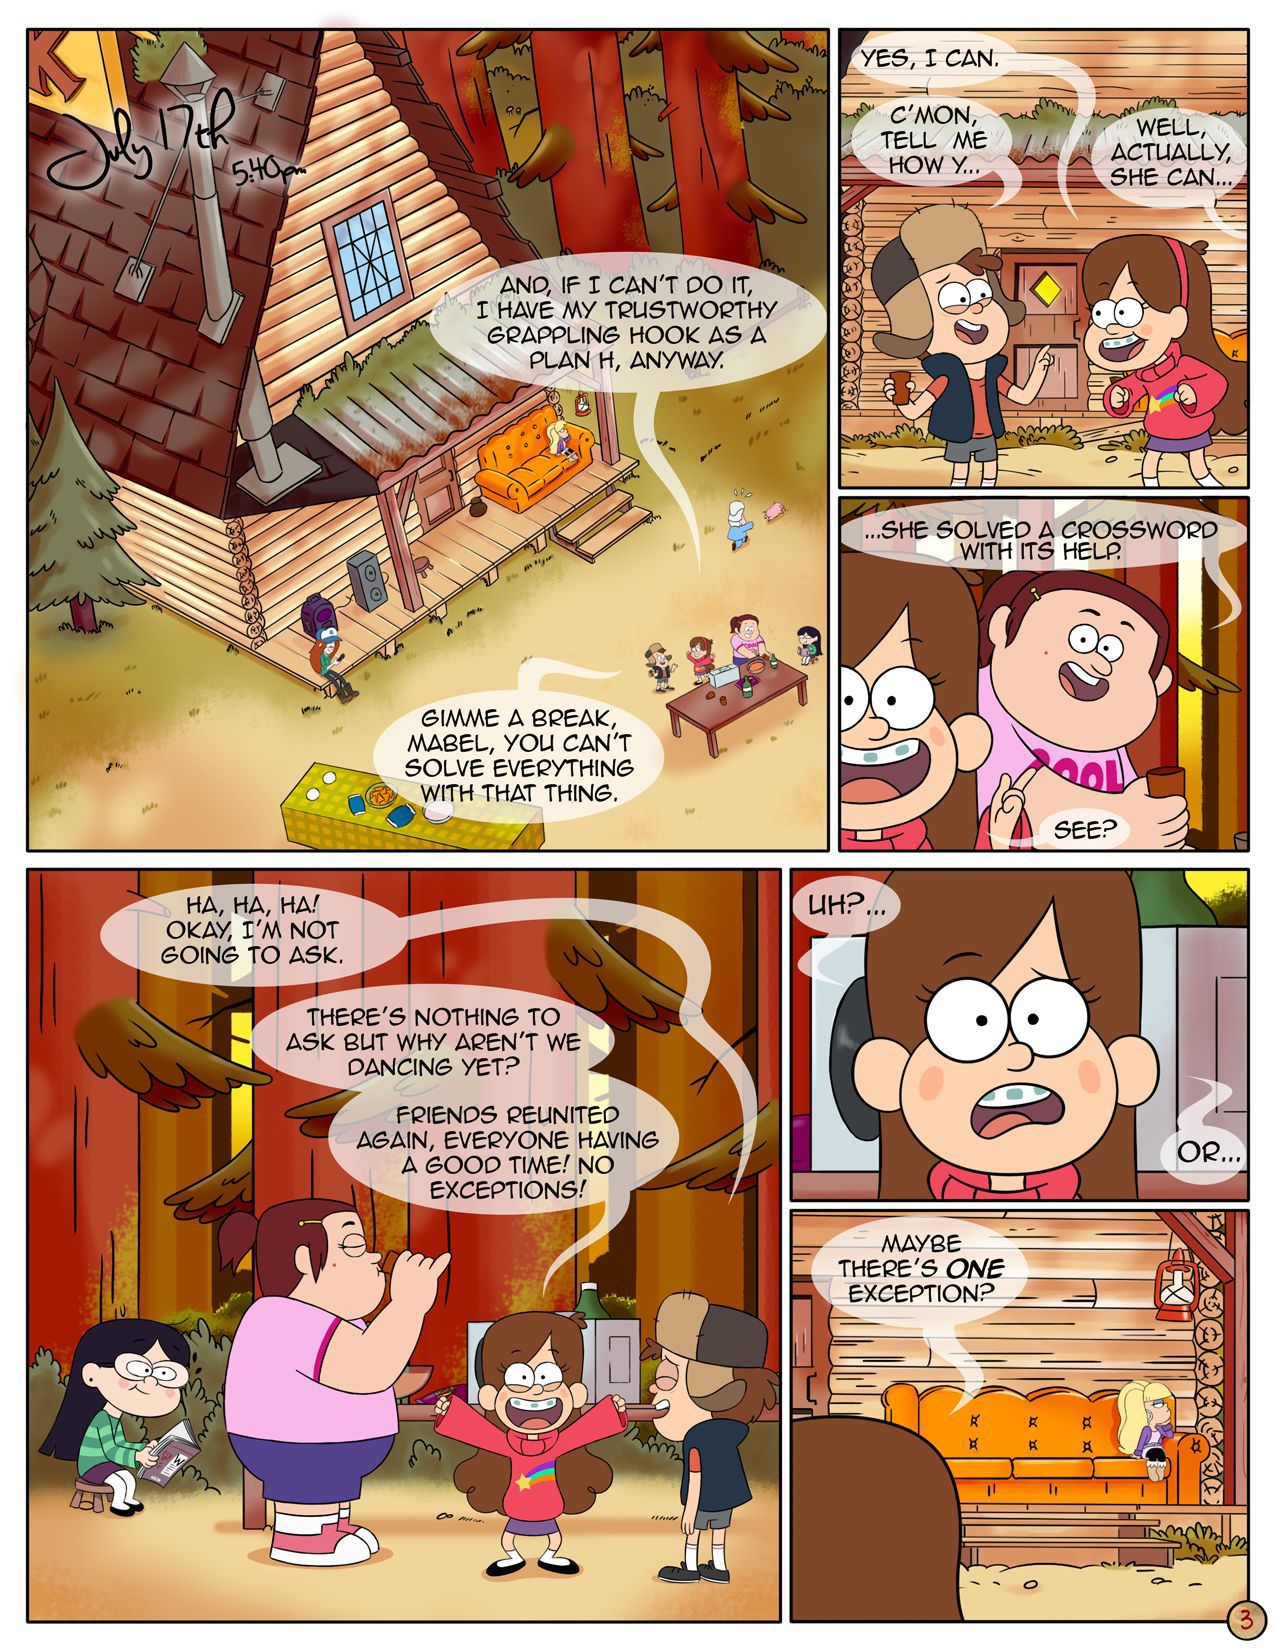 [Area] Next Summer (Gravity Falls) [Ongoing] 4